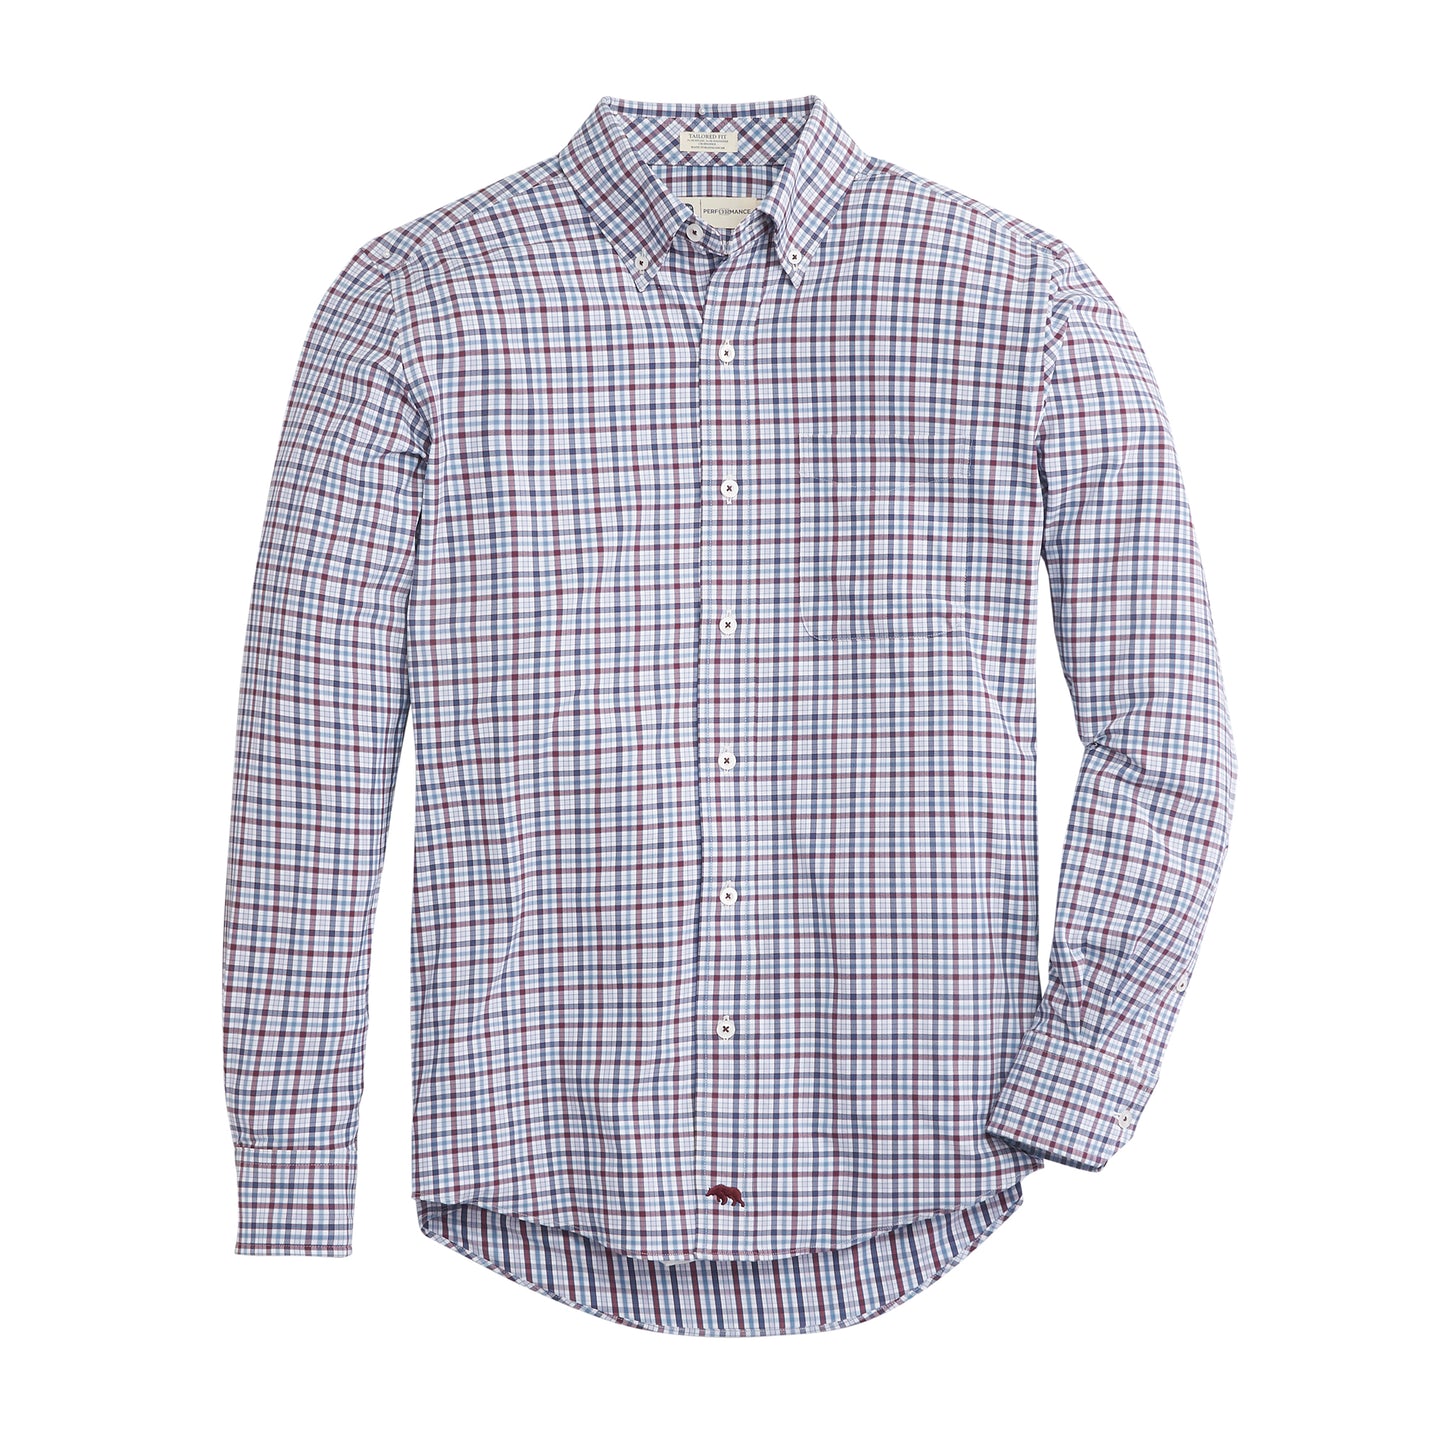 Cody Tailored Fit Performance Button Down